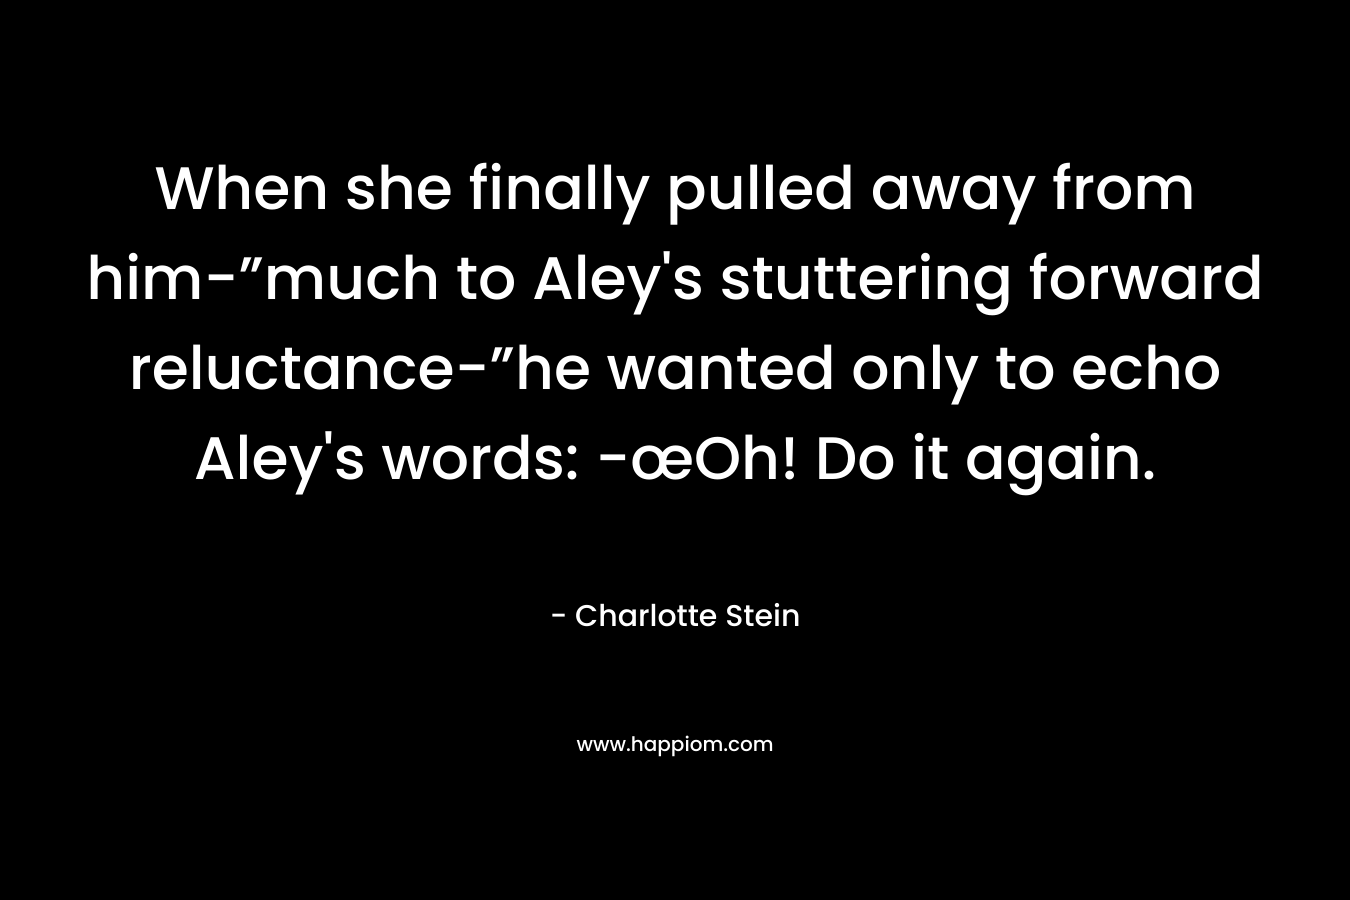 When she finally pulled away from him-”much to Aley's stuttering forward reluctance-”he wanted only to echo Aley's words: -œOh! Do it again.